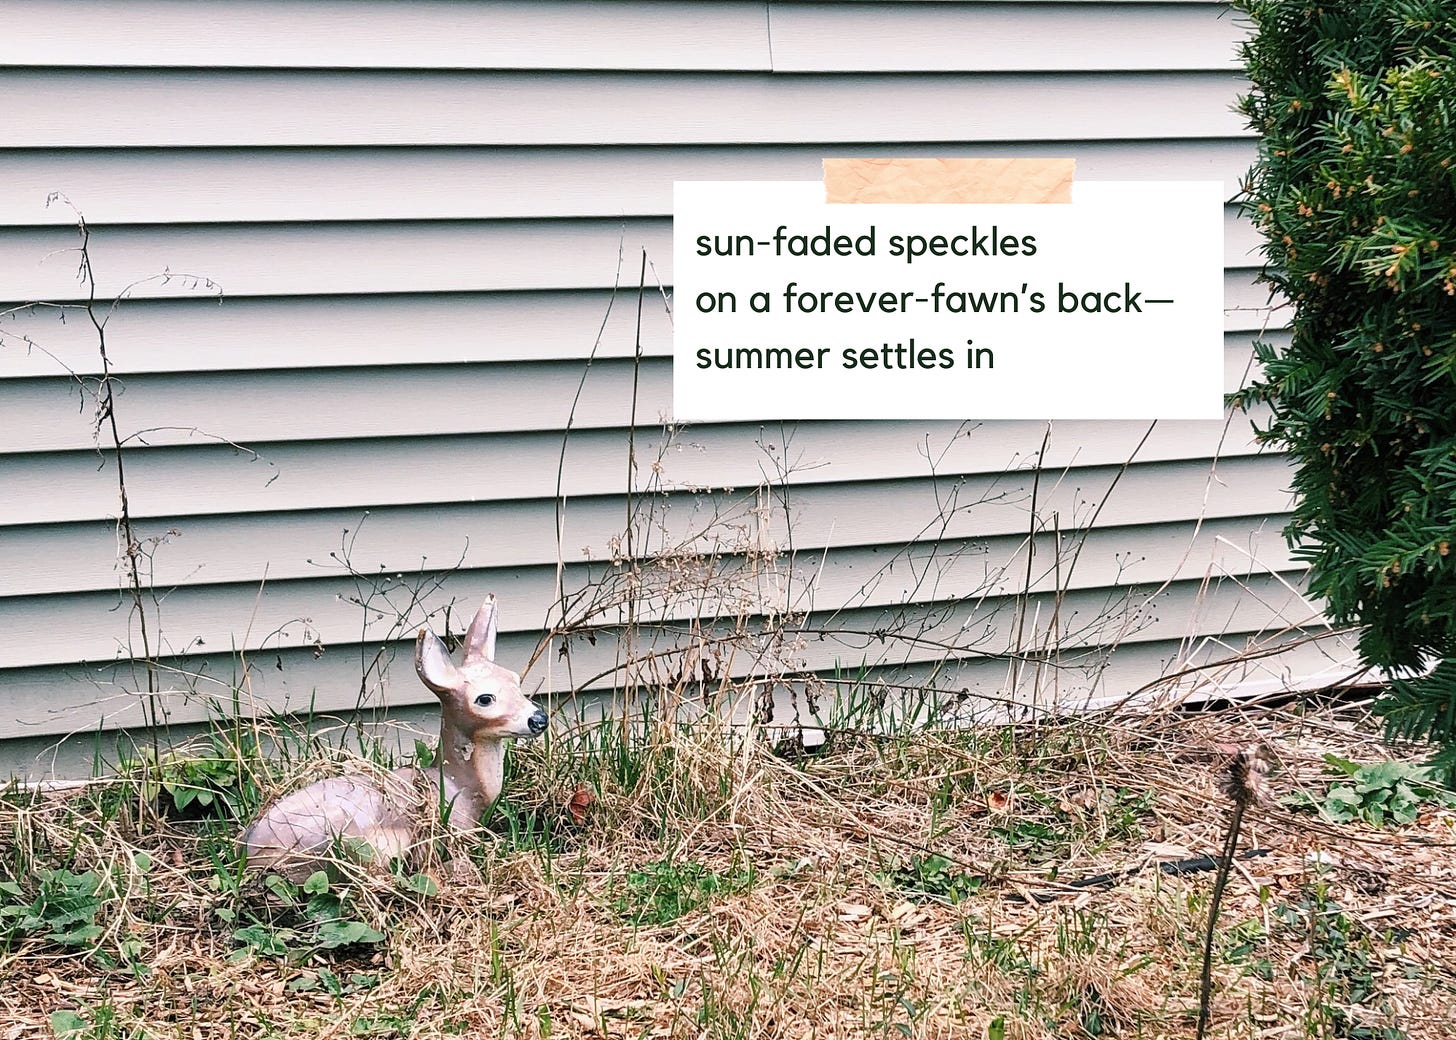 Photo of a forlorn deer statue in a weedy yard. Text reads: "sun-faded speckles / on a forever-fawn's back— / summer settles in"